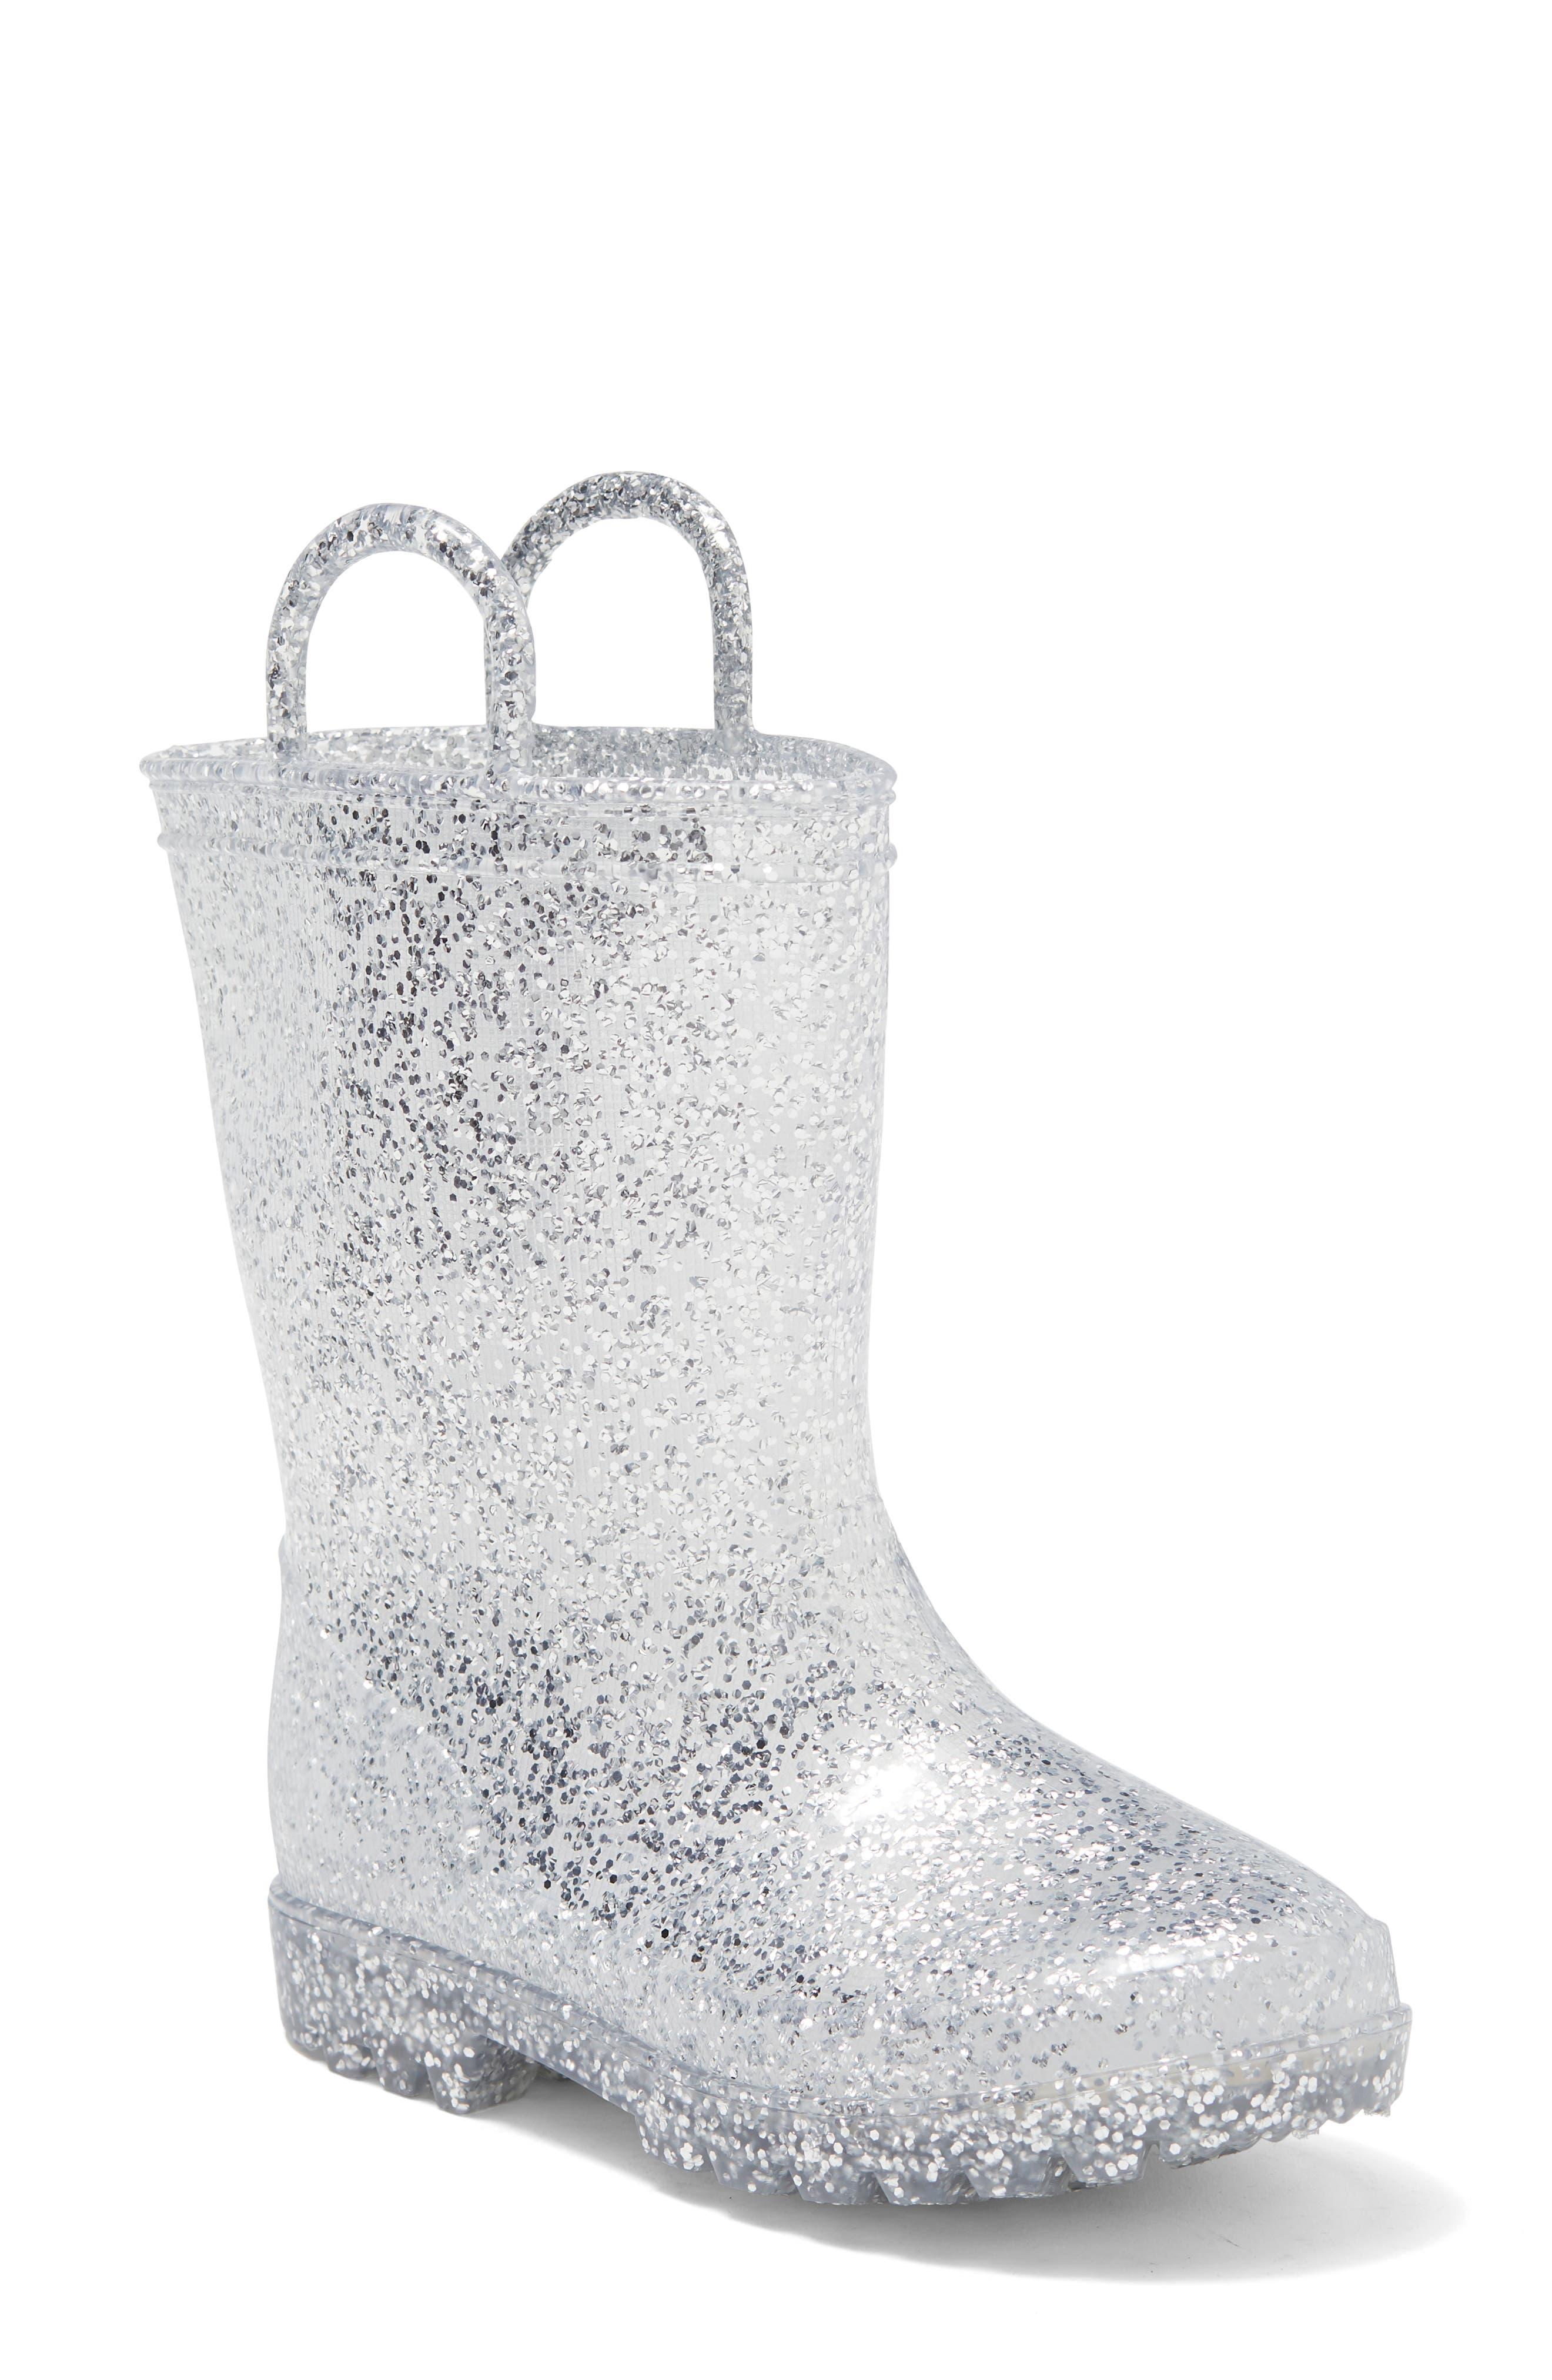 Children's Diamante sparkly fur lined Boots Kids Pull on glitter 